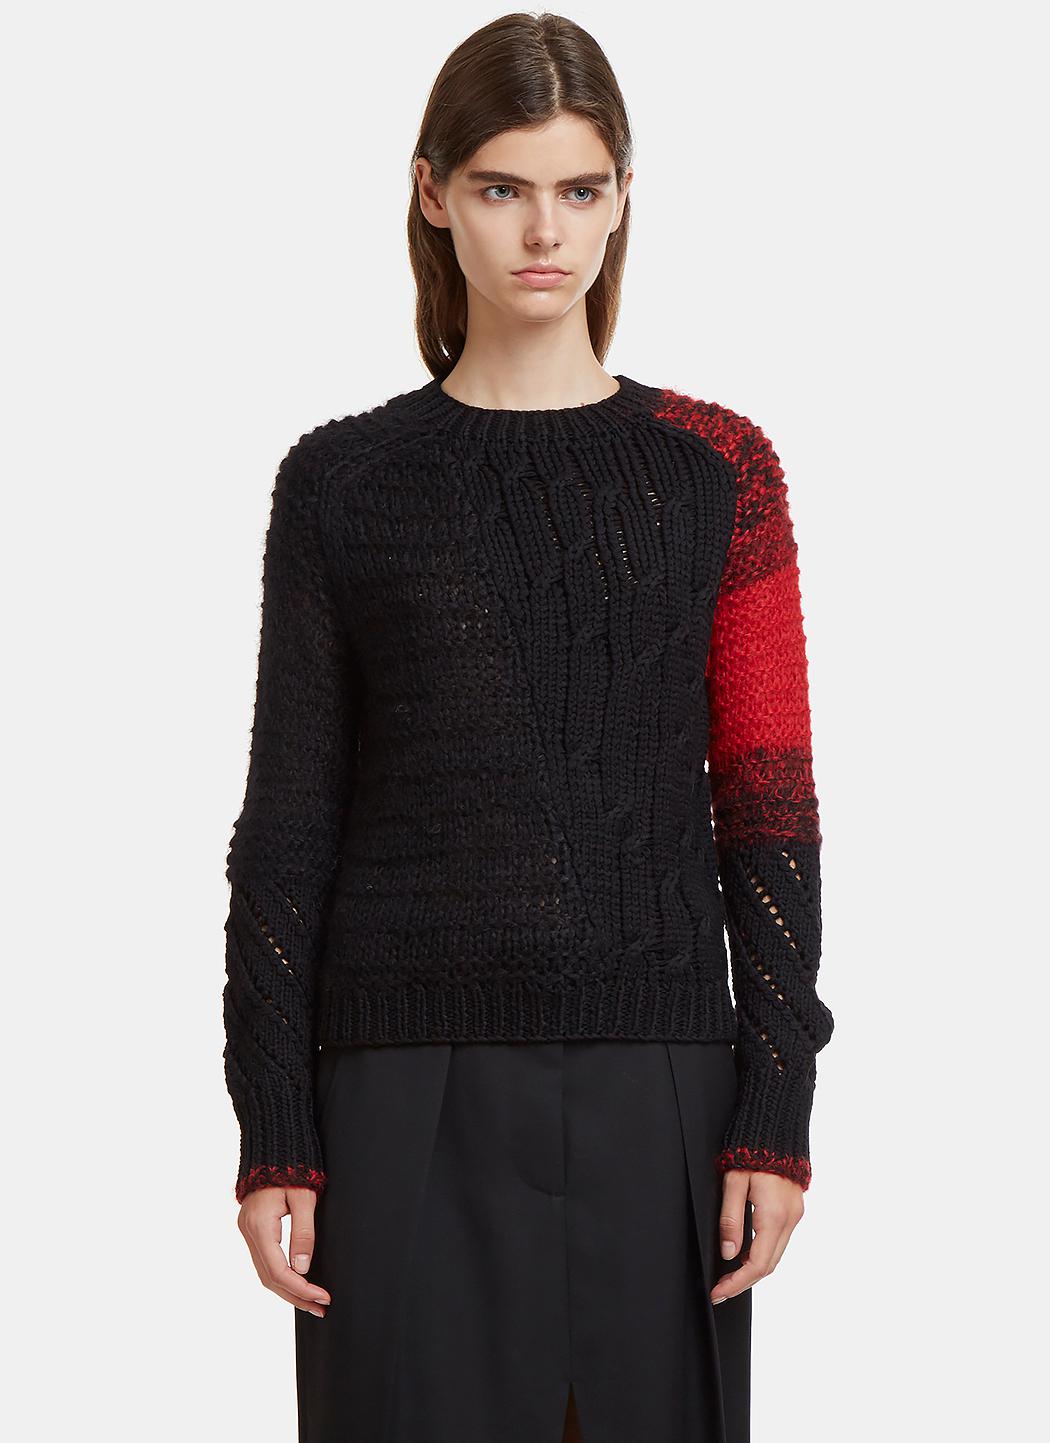 Lyst - Helmut Lang Patchwork Knit Sweater In Red And Black in Red